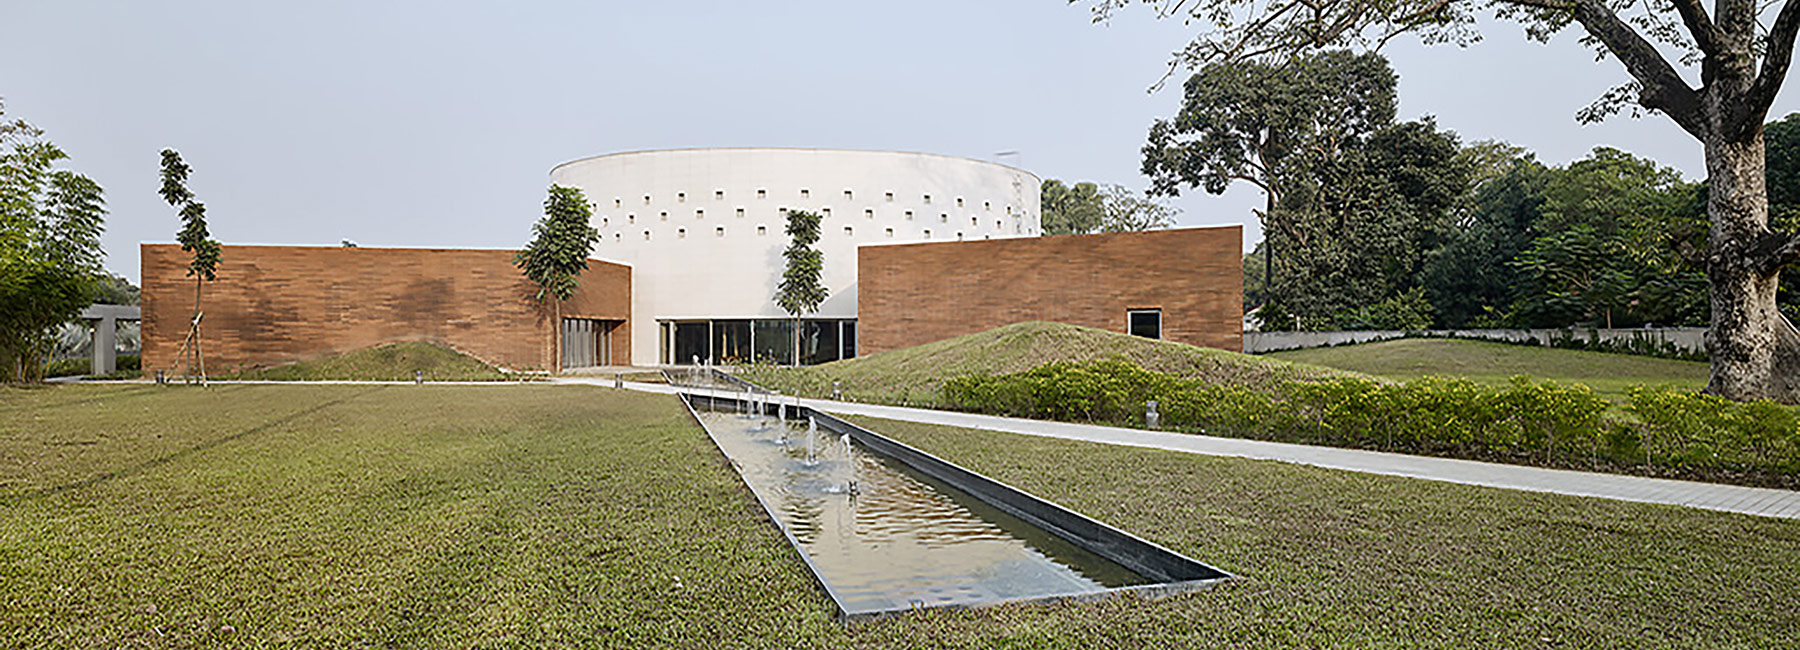 maki and associates conceives bihar museum in india as an interconnected campus